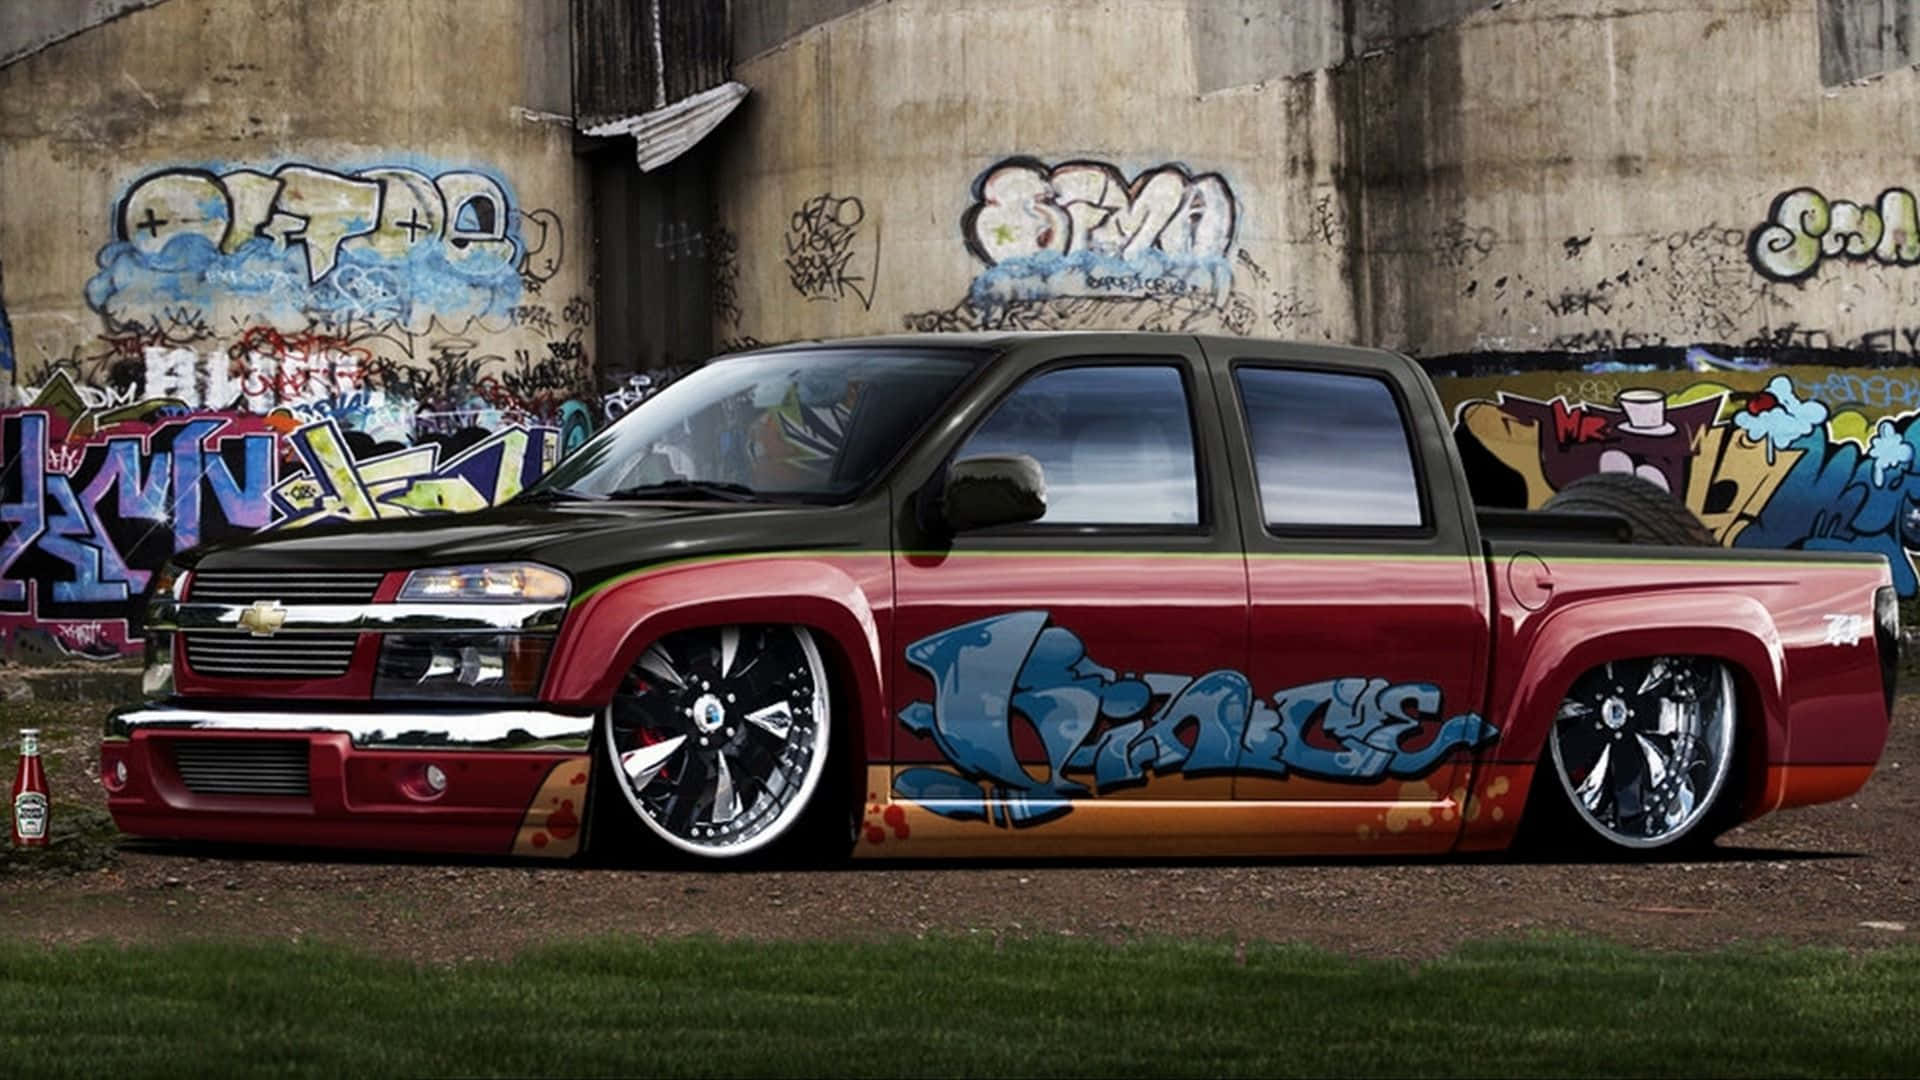 Download A Red And Black Truck With Graffiti On It Wallpaper